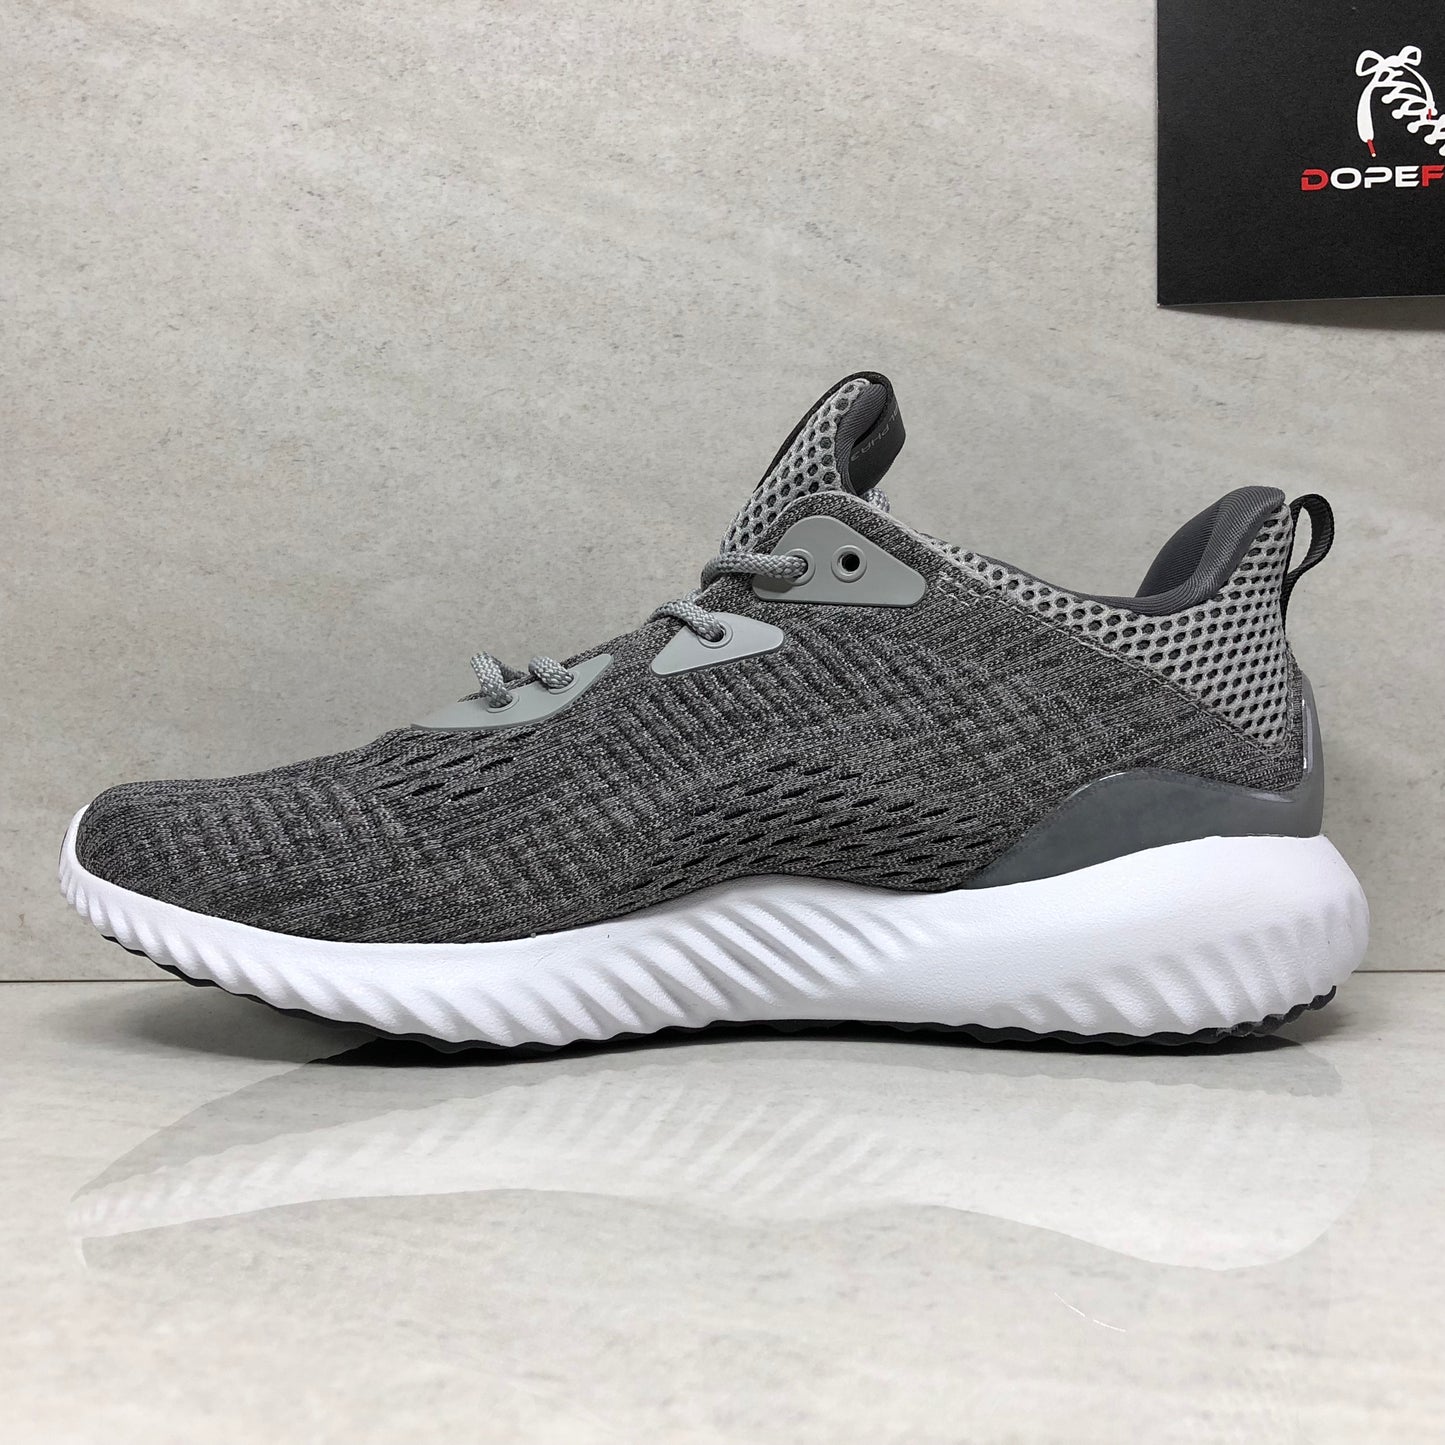 DS Mujer Adidas Alpha Bounce Talla 8 Grises BW1194